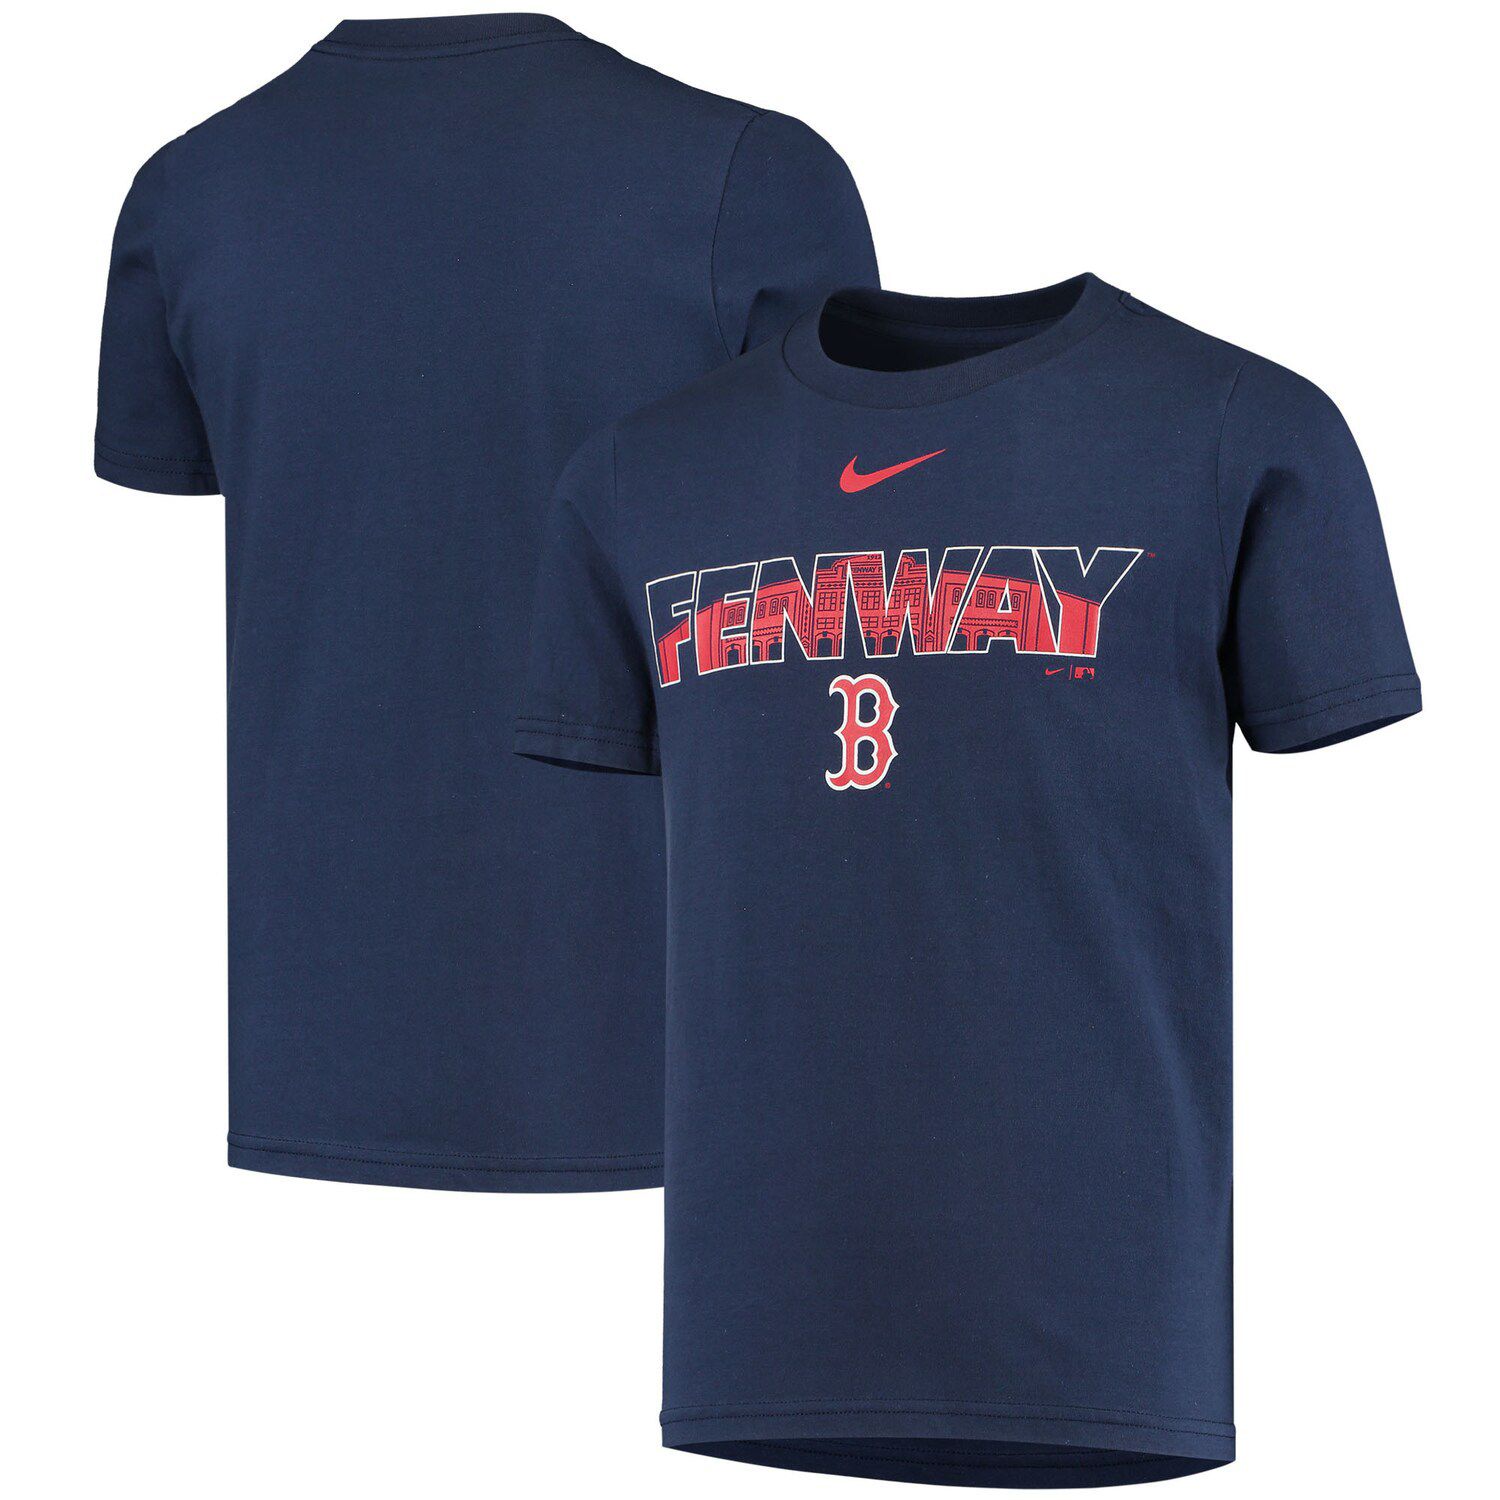 boston red sox shirts for kids